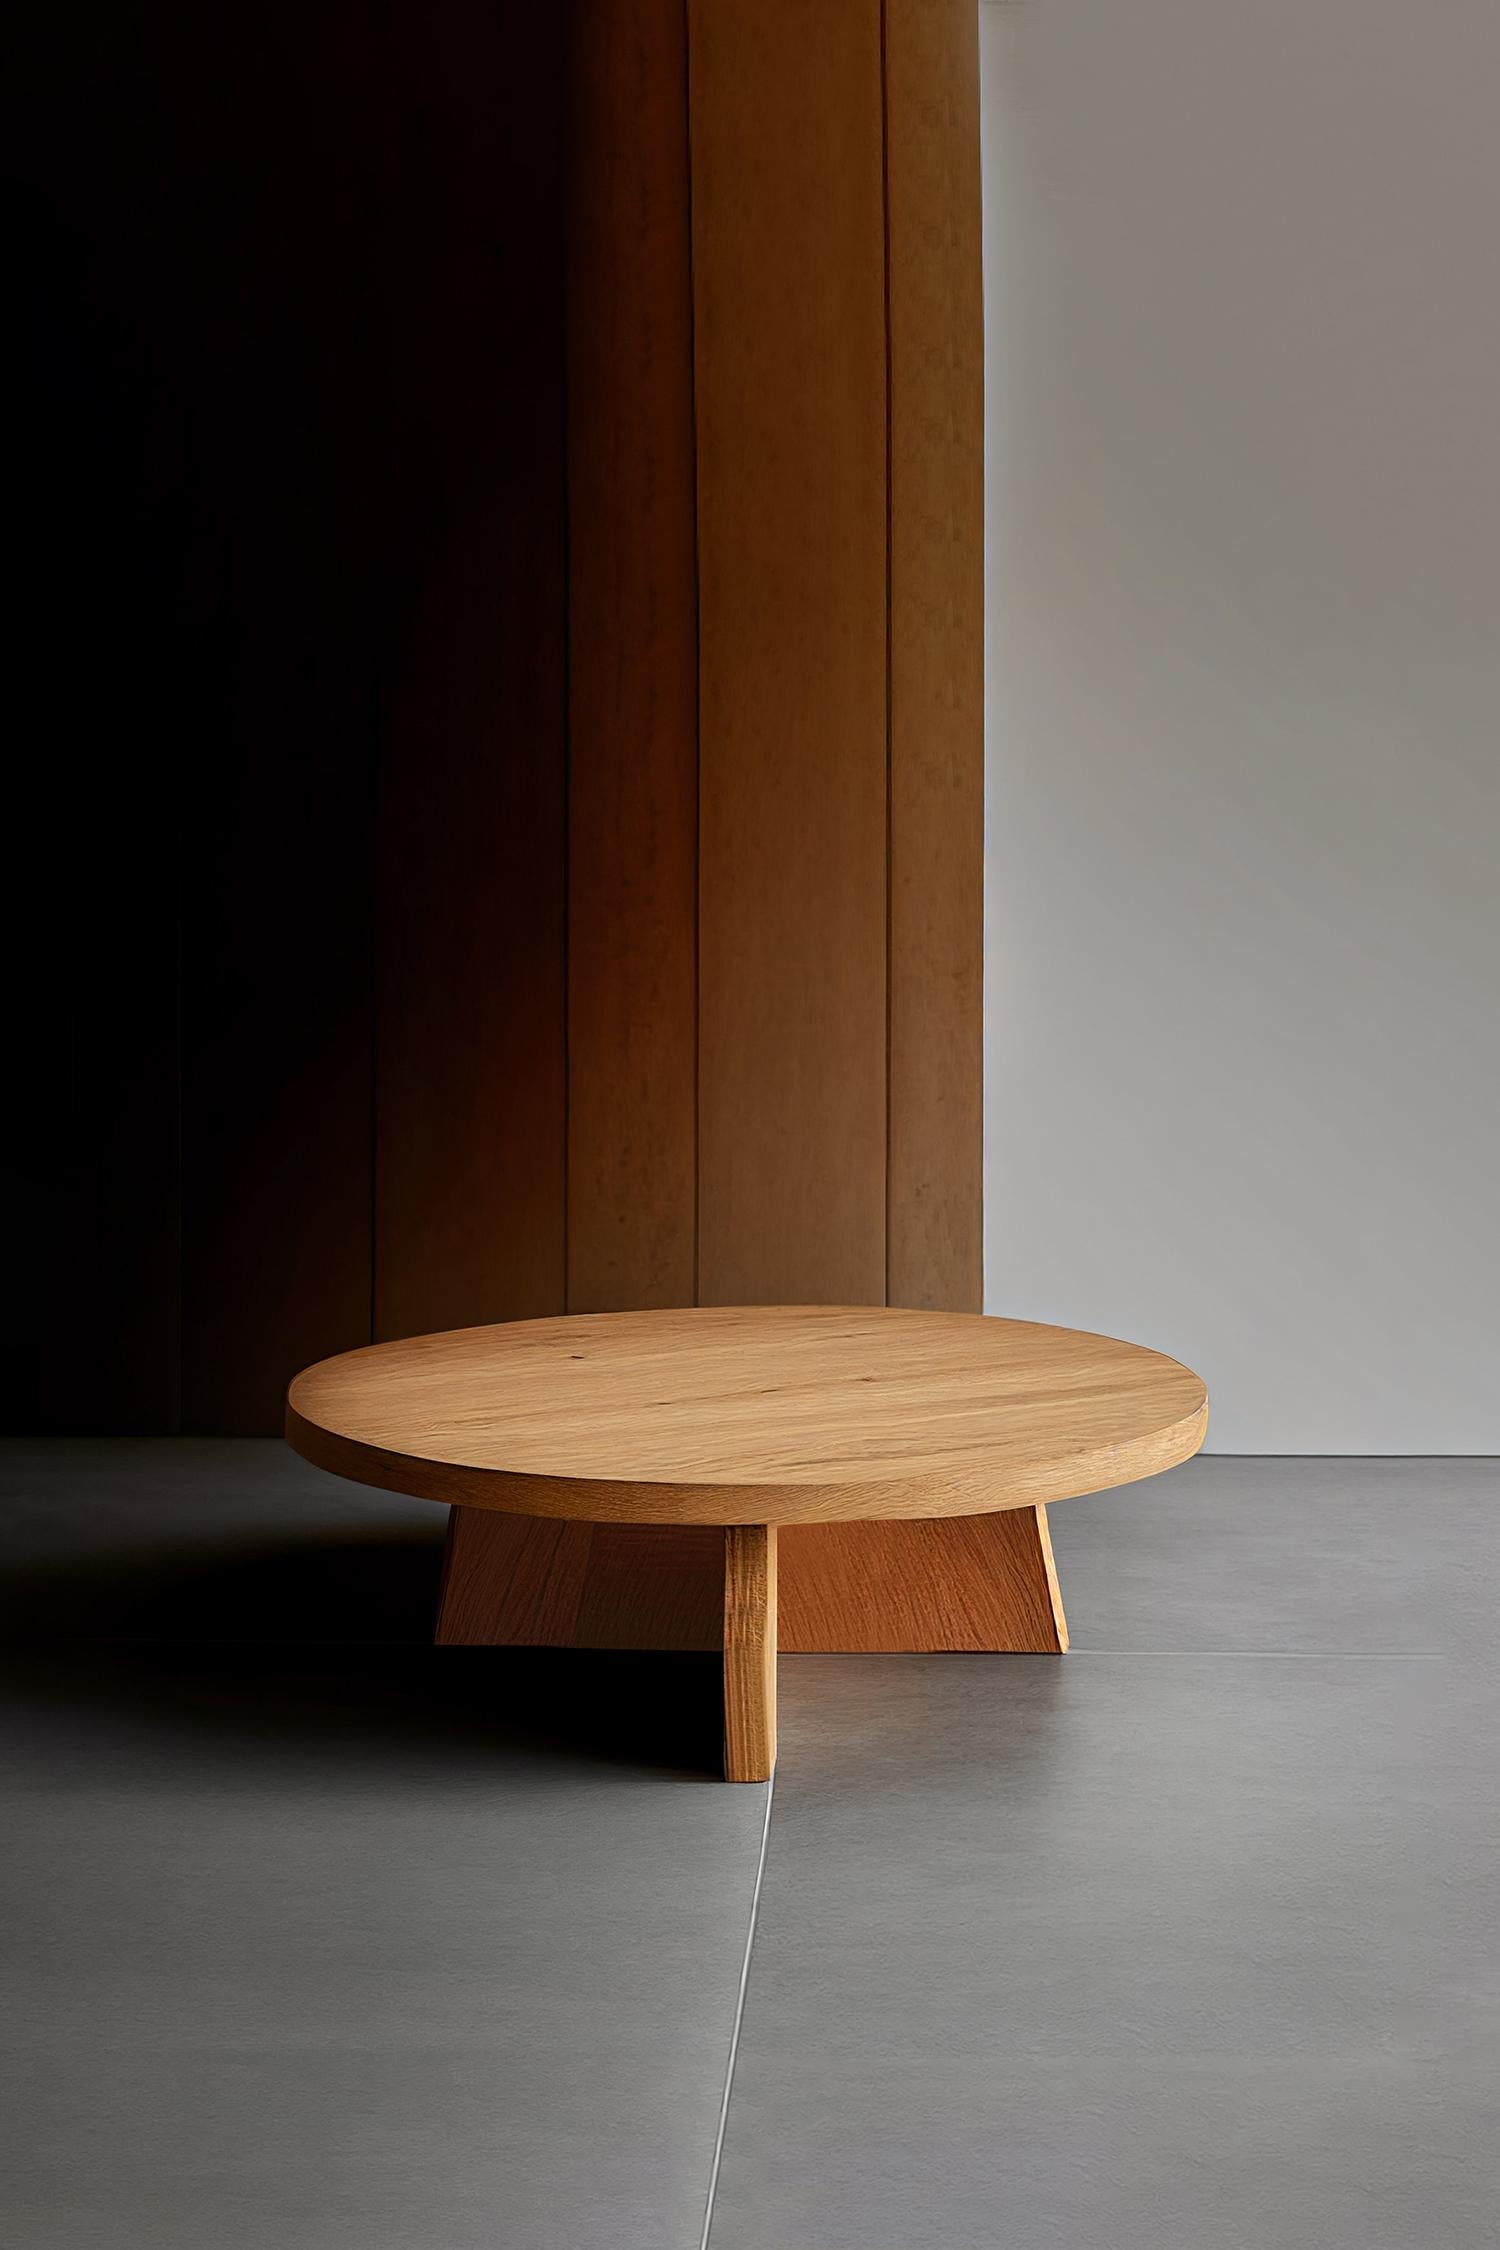 Round coffee table with cross legs made of solid oak.
Product made to order; some variances may apply to the final piece.


——

NONO is a Mexican design brand with more than 10 years of experience dedicated to the production of interior